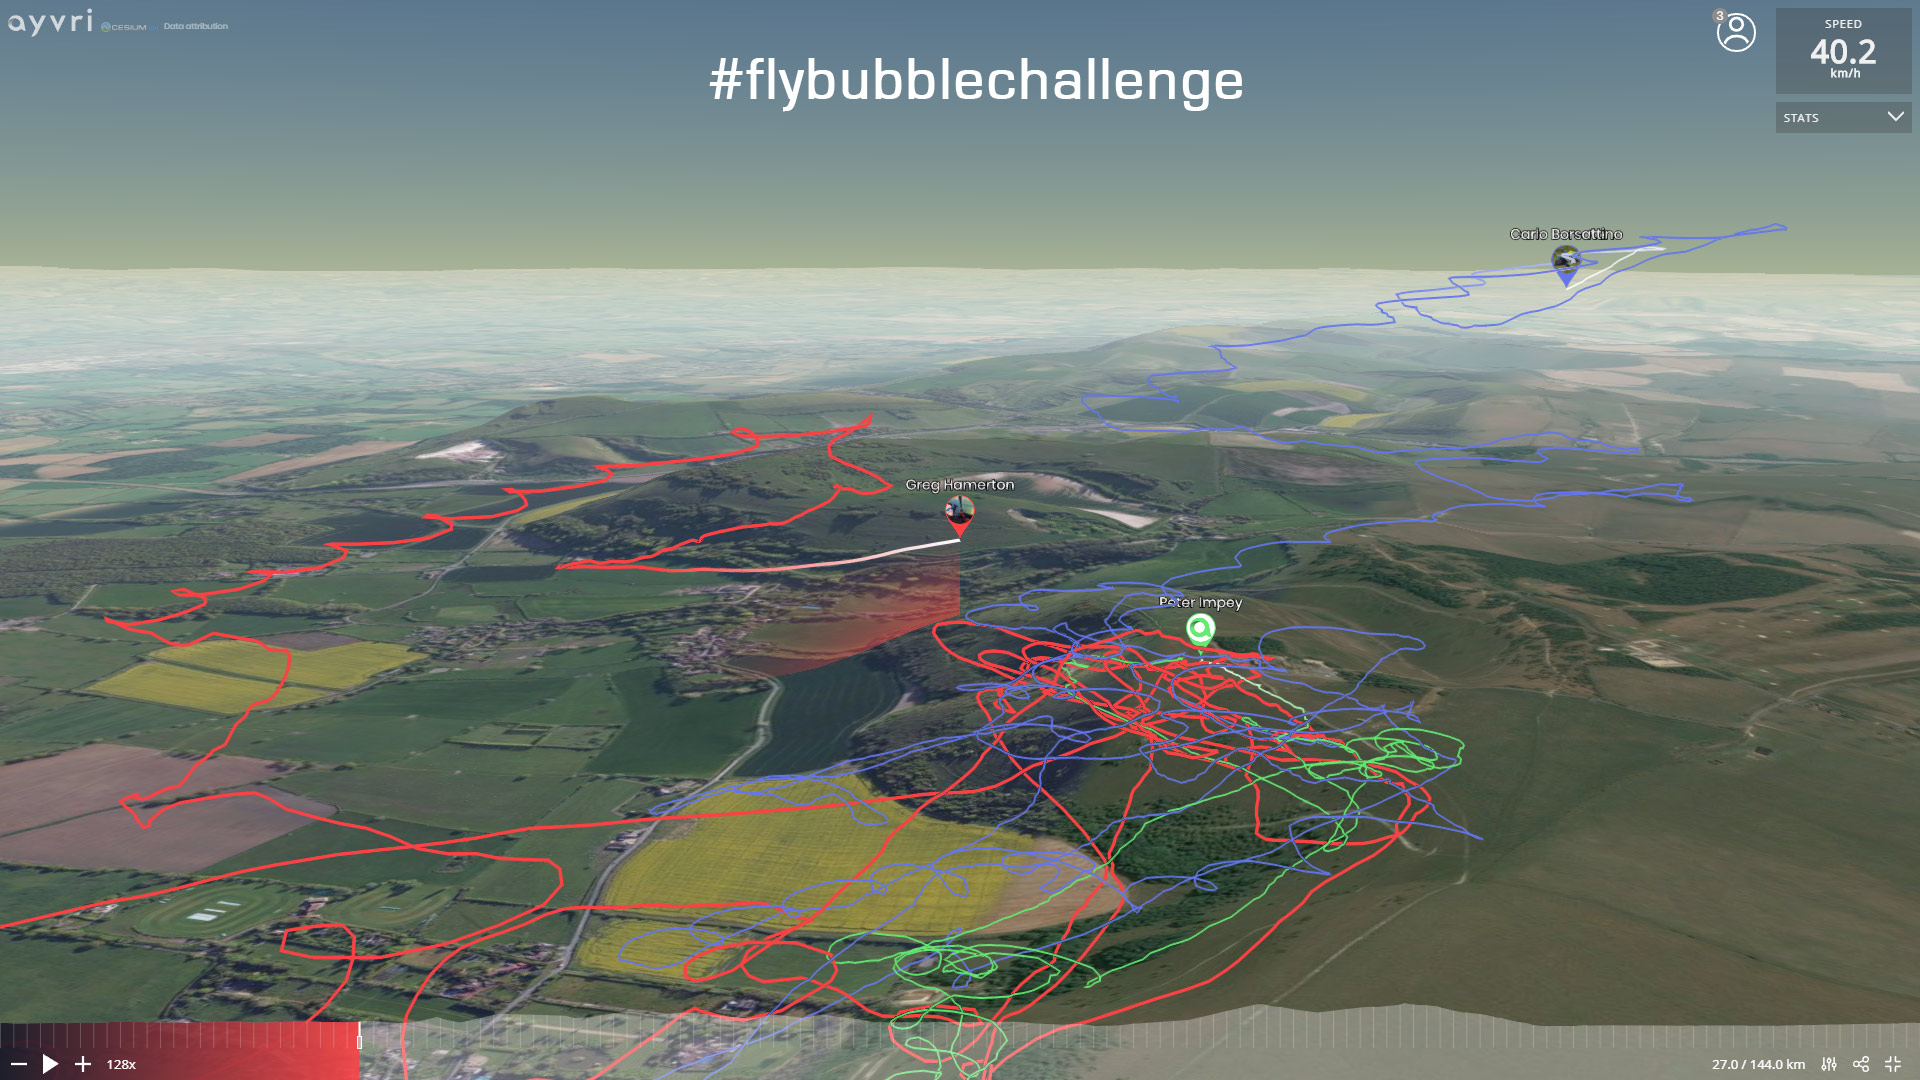 The Flybubble Challenge 2019: tracks